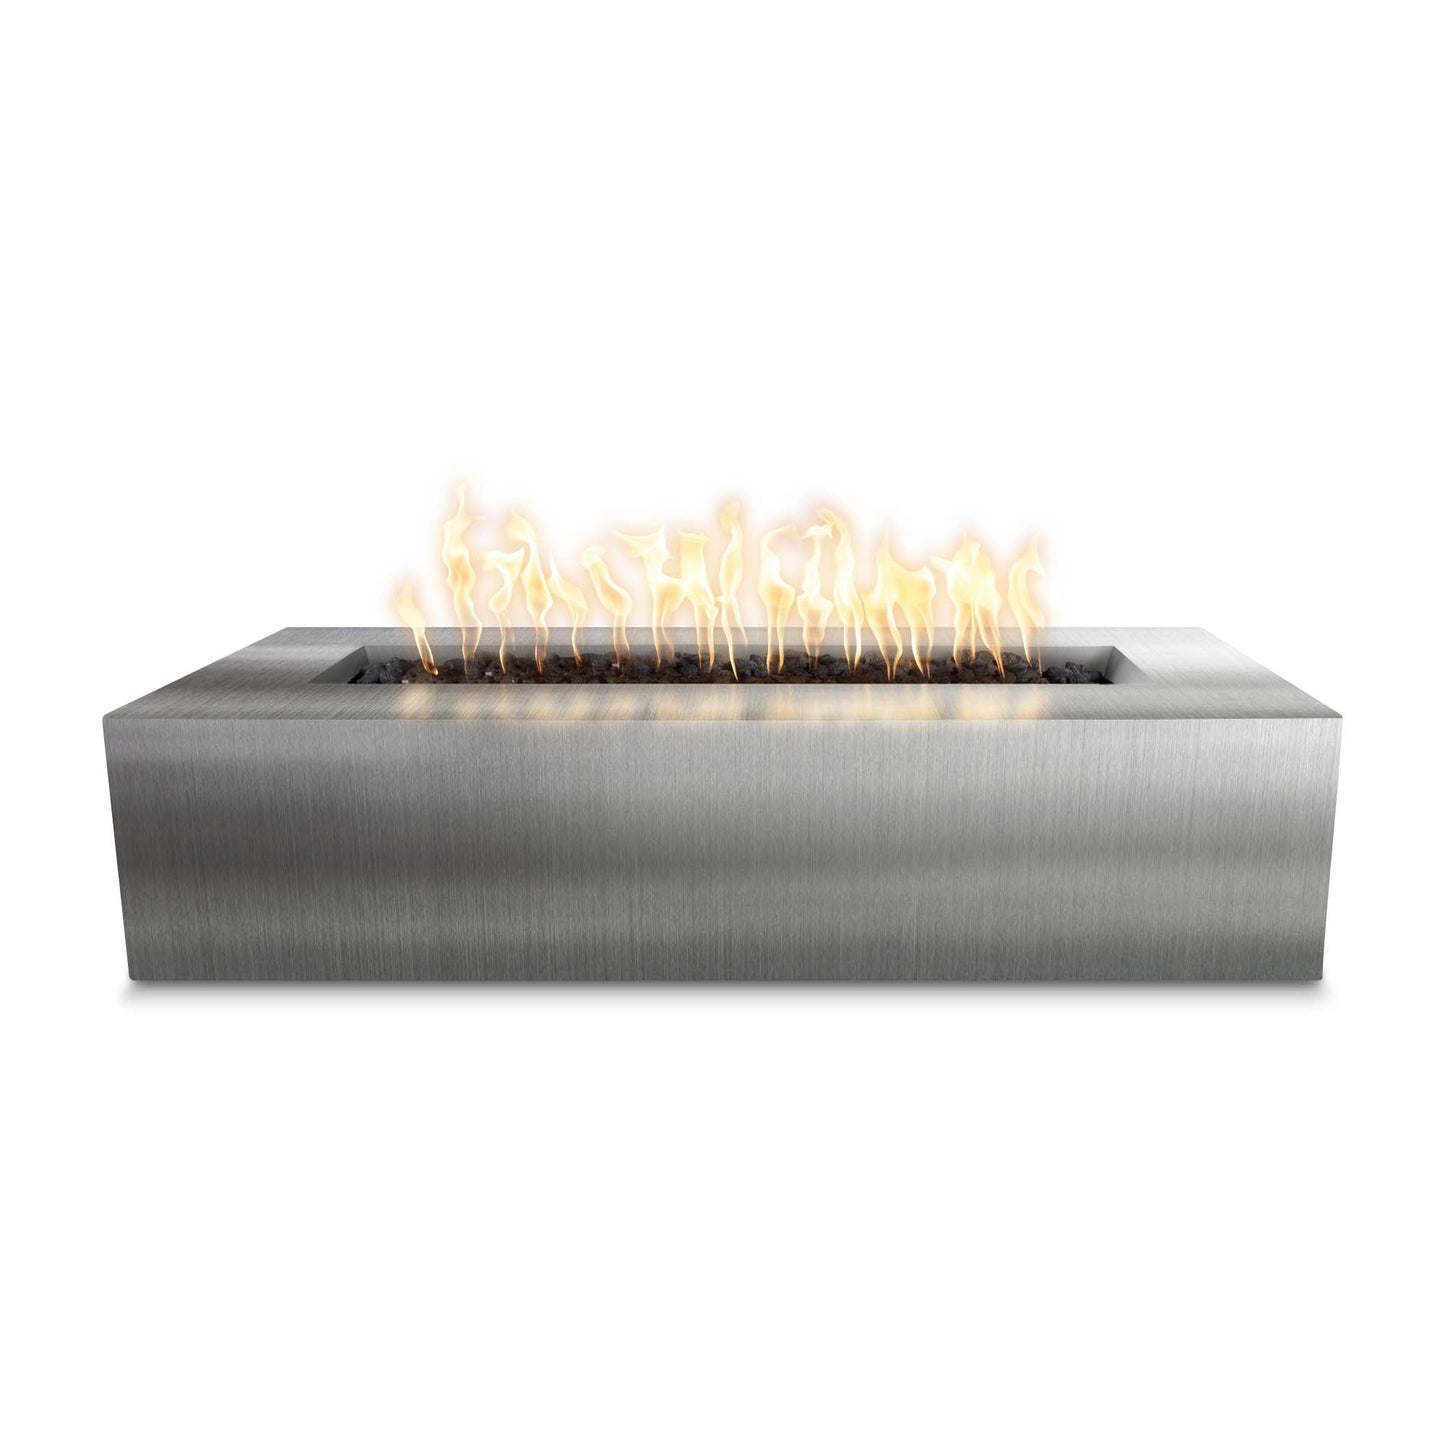 The Outdoor Plus Rectangular Regal 54" Stainless Steel Liquid Propane Fire Pit with Match Lit with Flame Sense Ignition